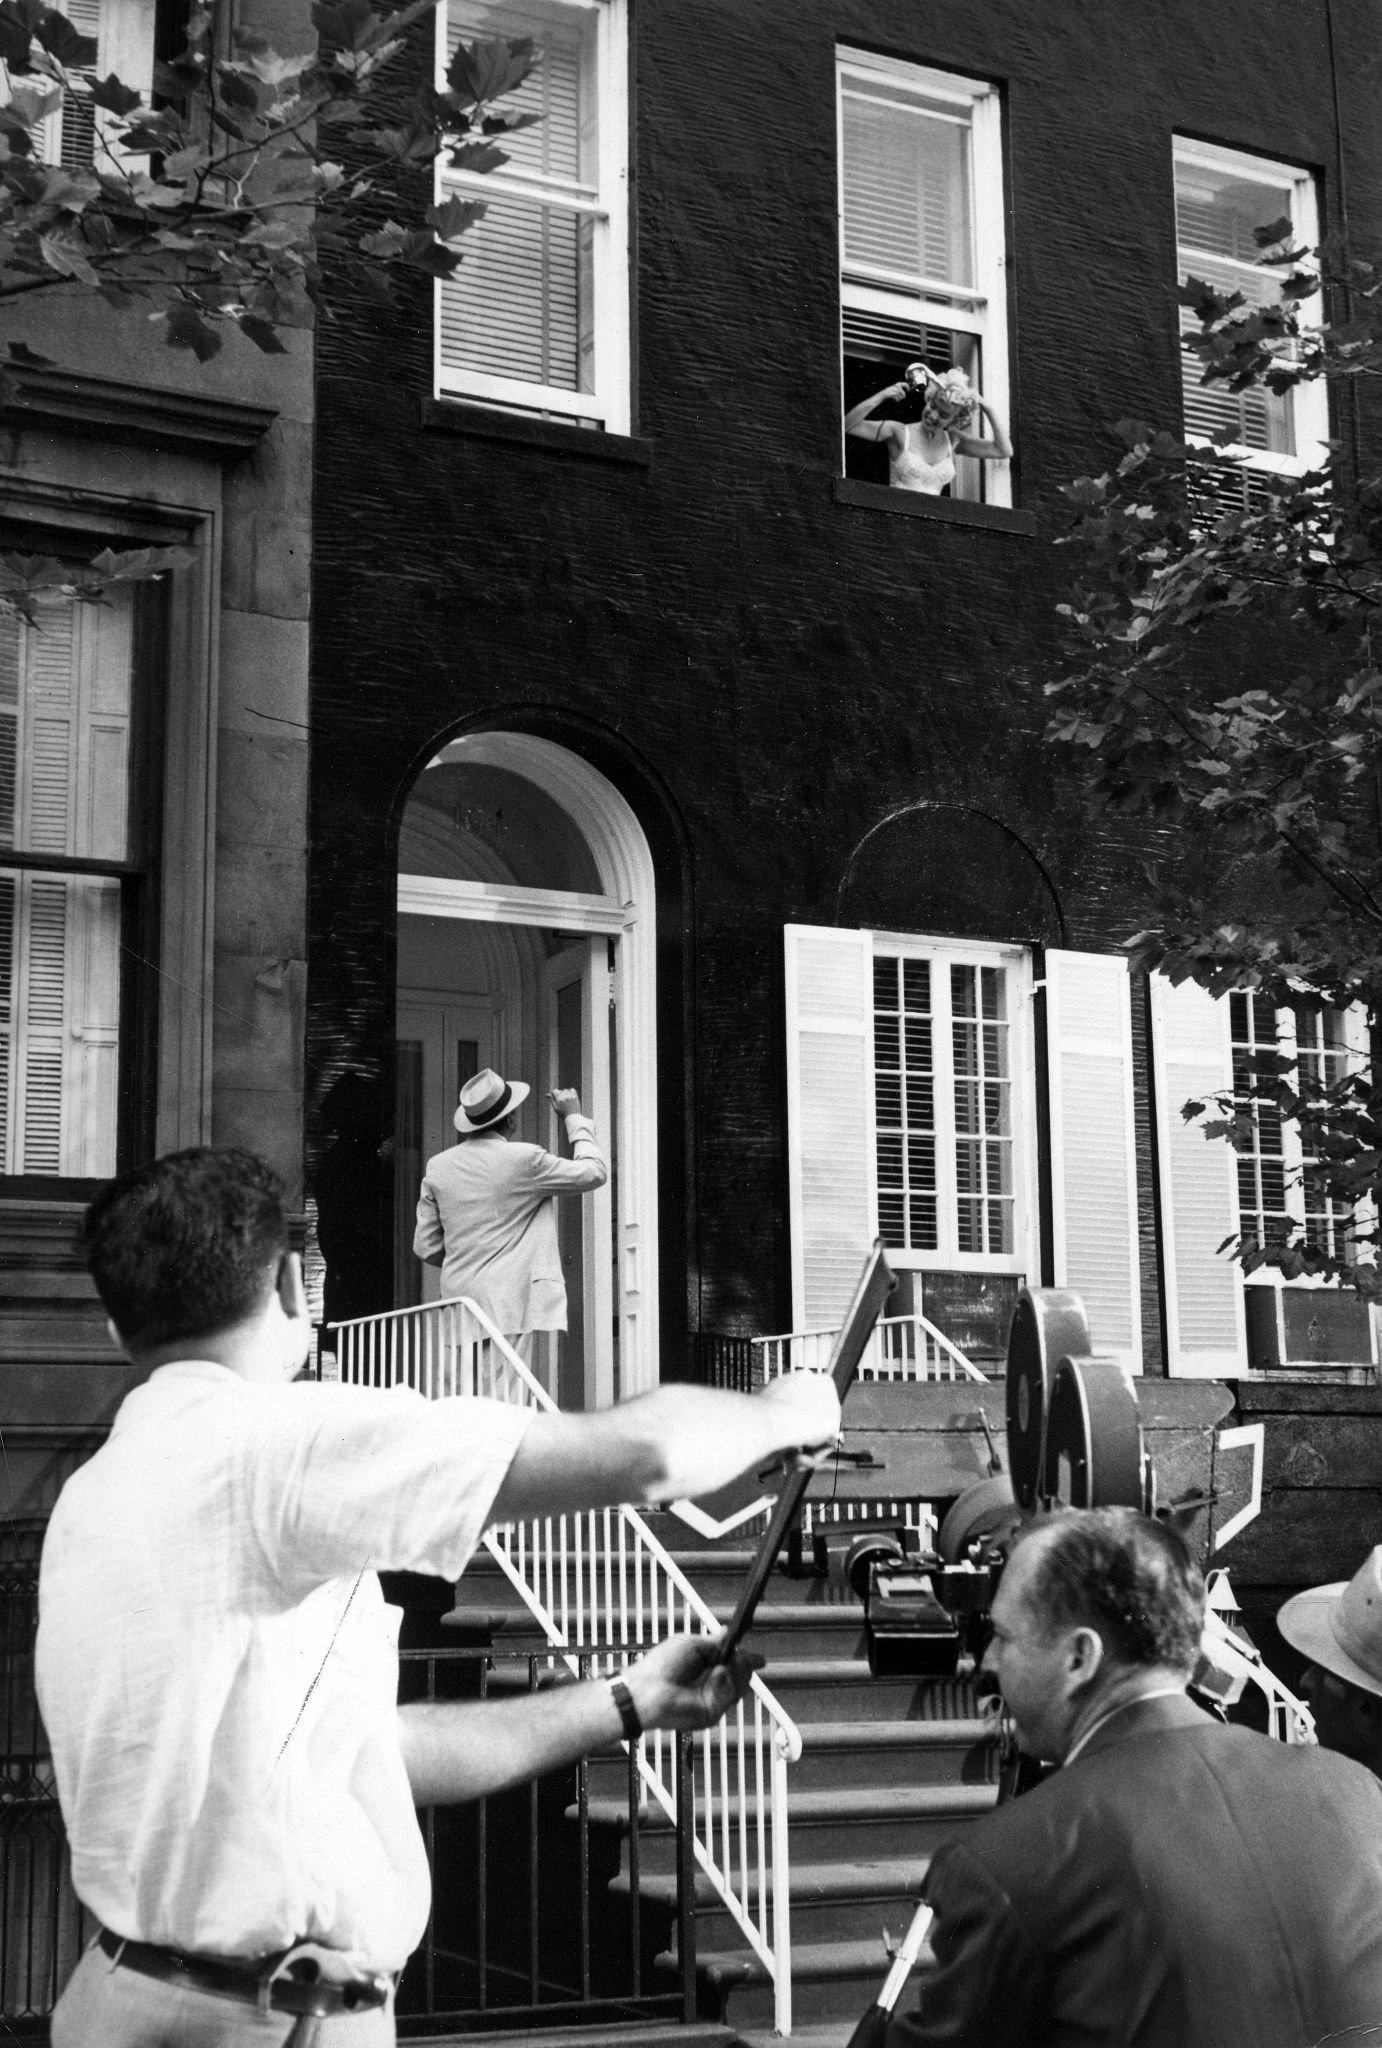 Marilyn Monroe leans out of a window wearing a slip and holding a hairdryer with co-star Tom Ewell standing below